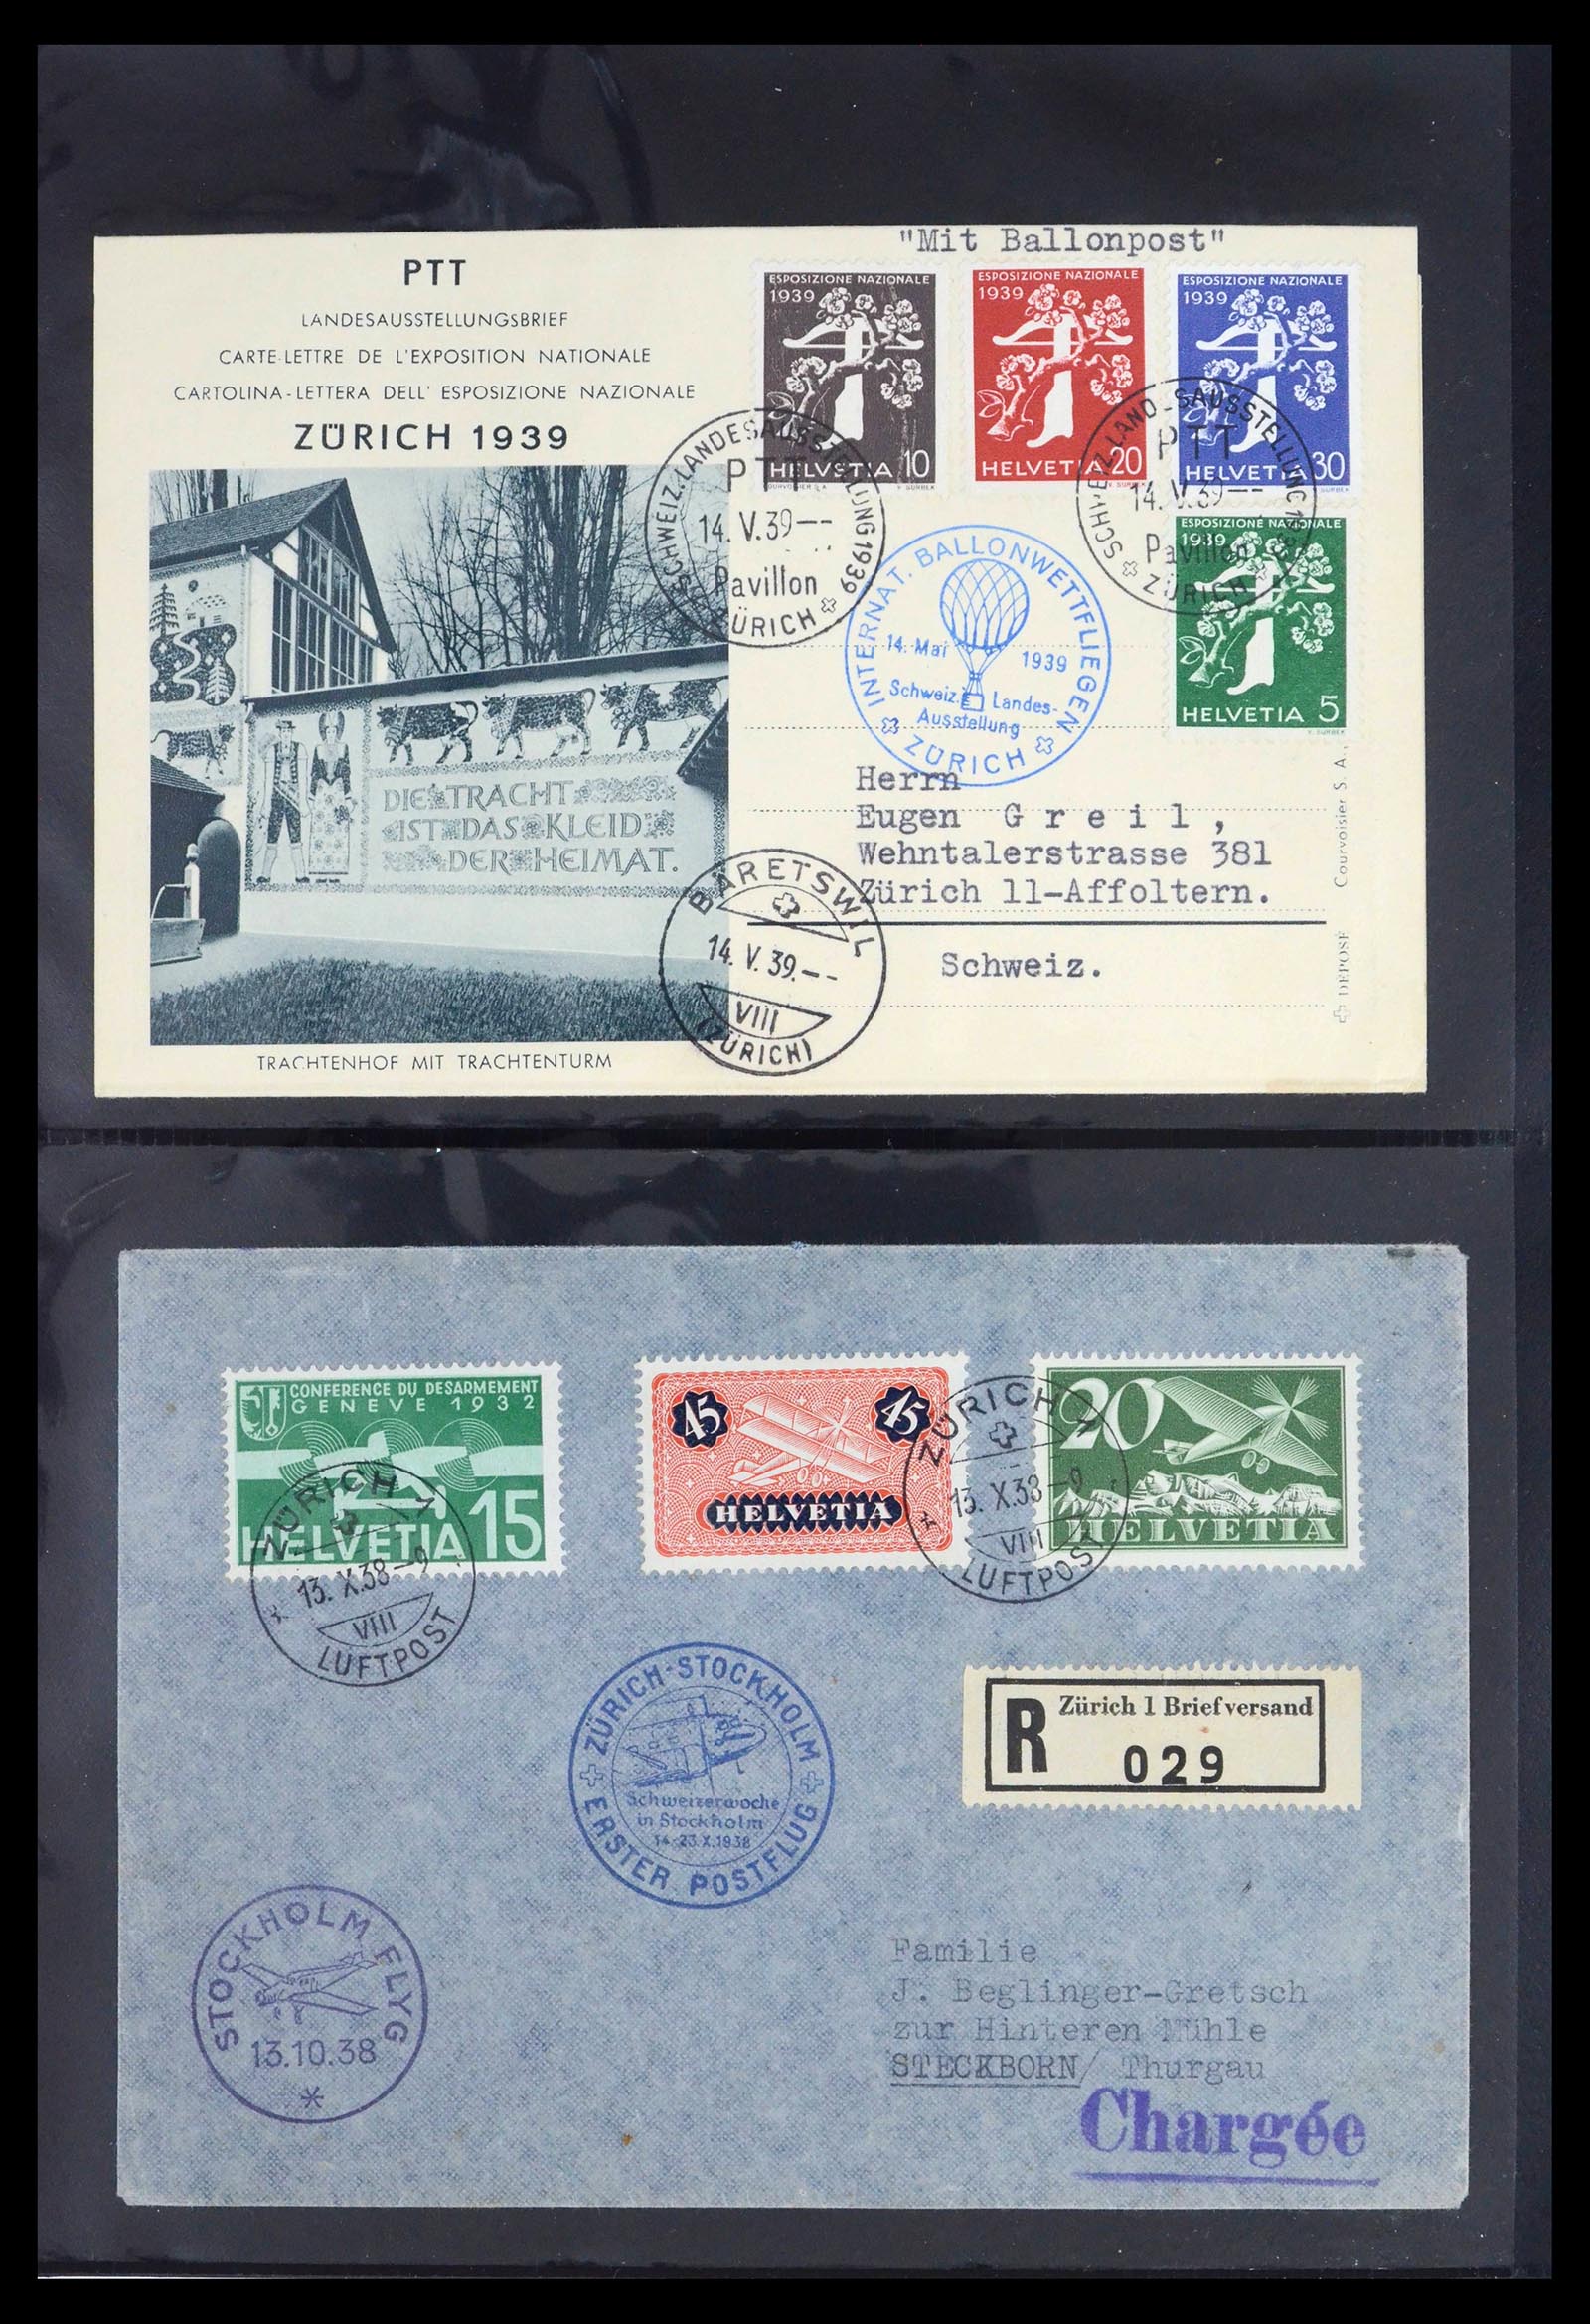 39533 0014 - Stamp collection 39533 Zwitserland airmail covers 1925-1960.